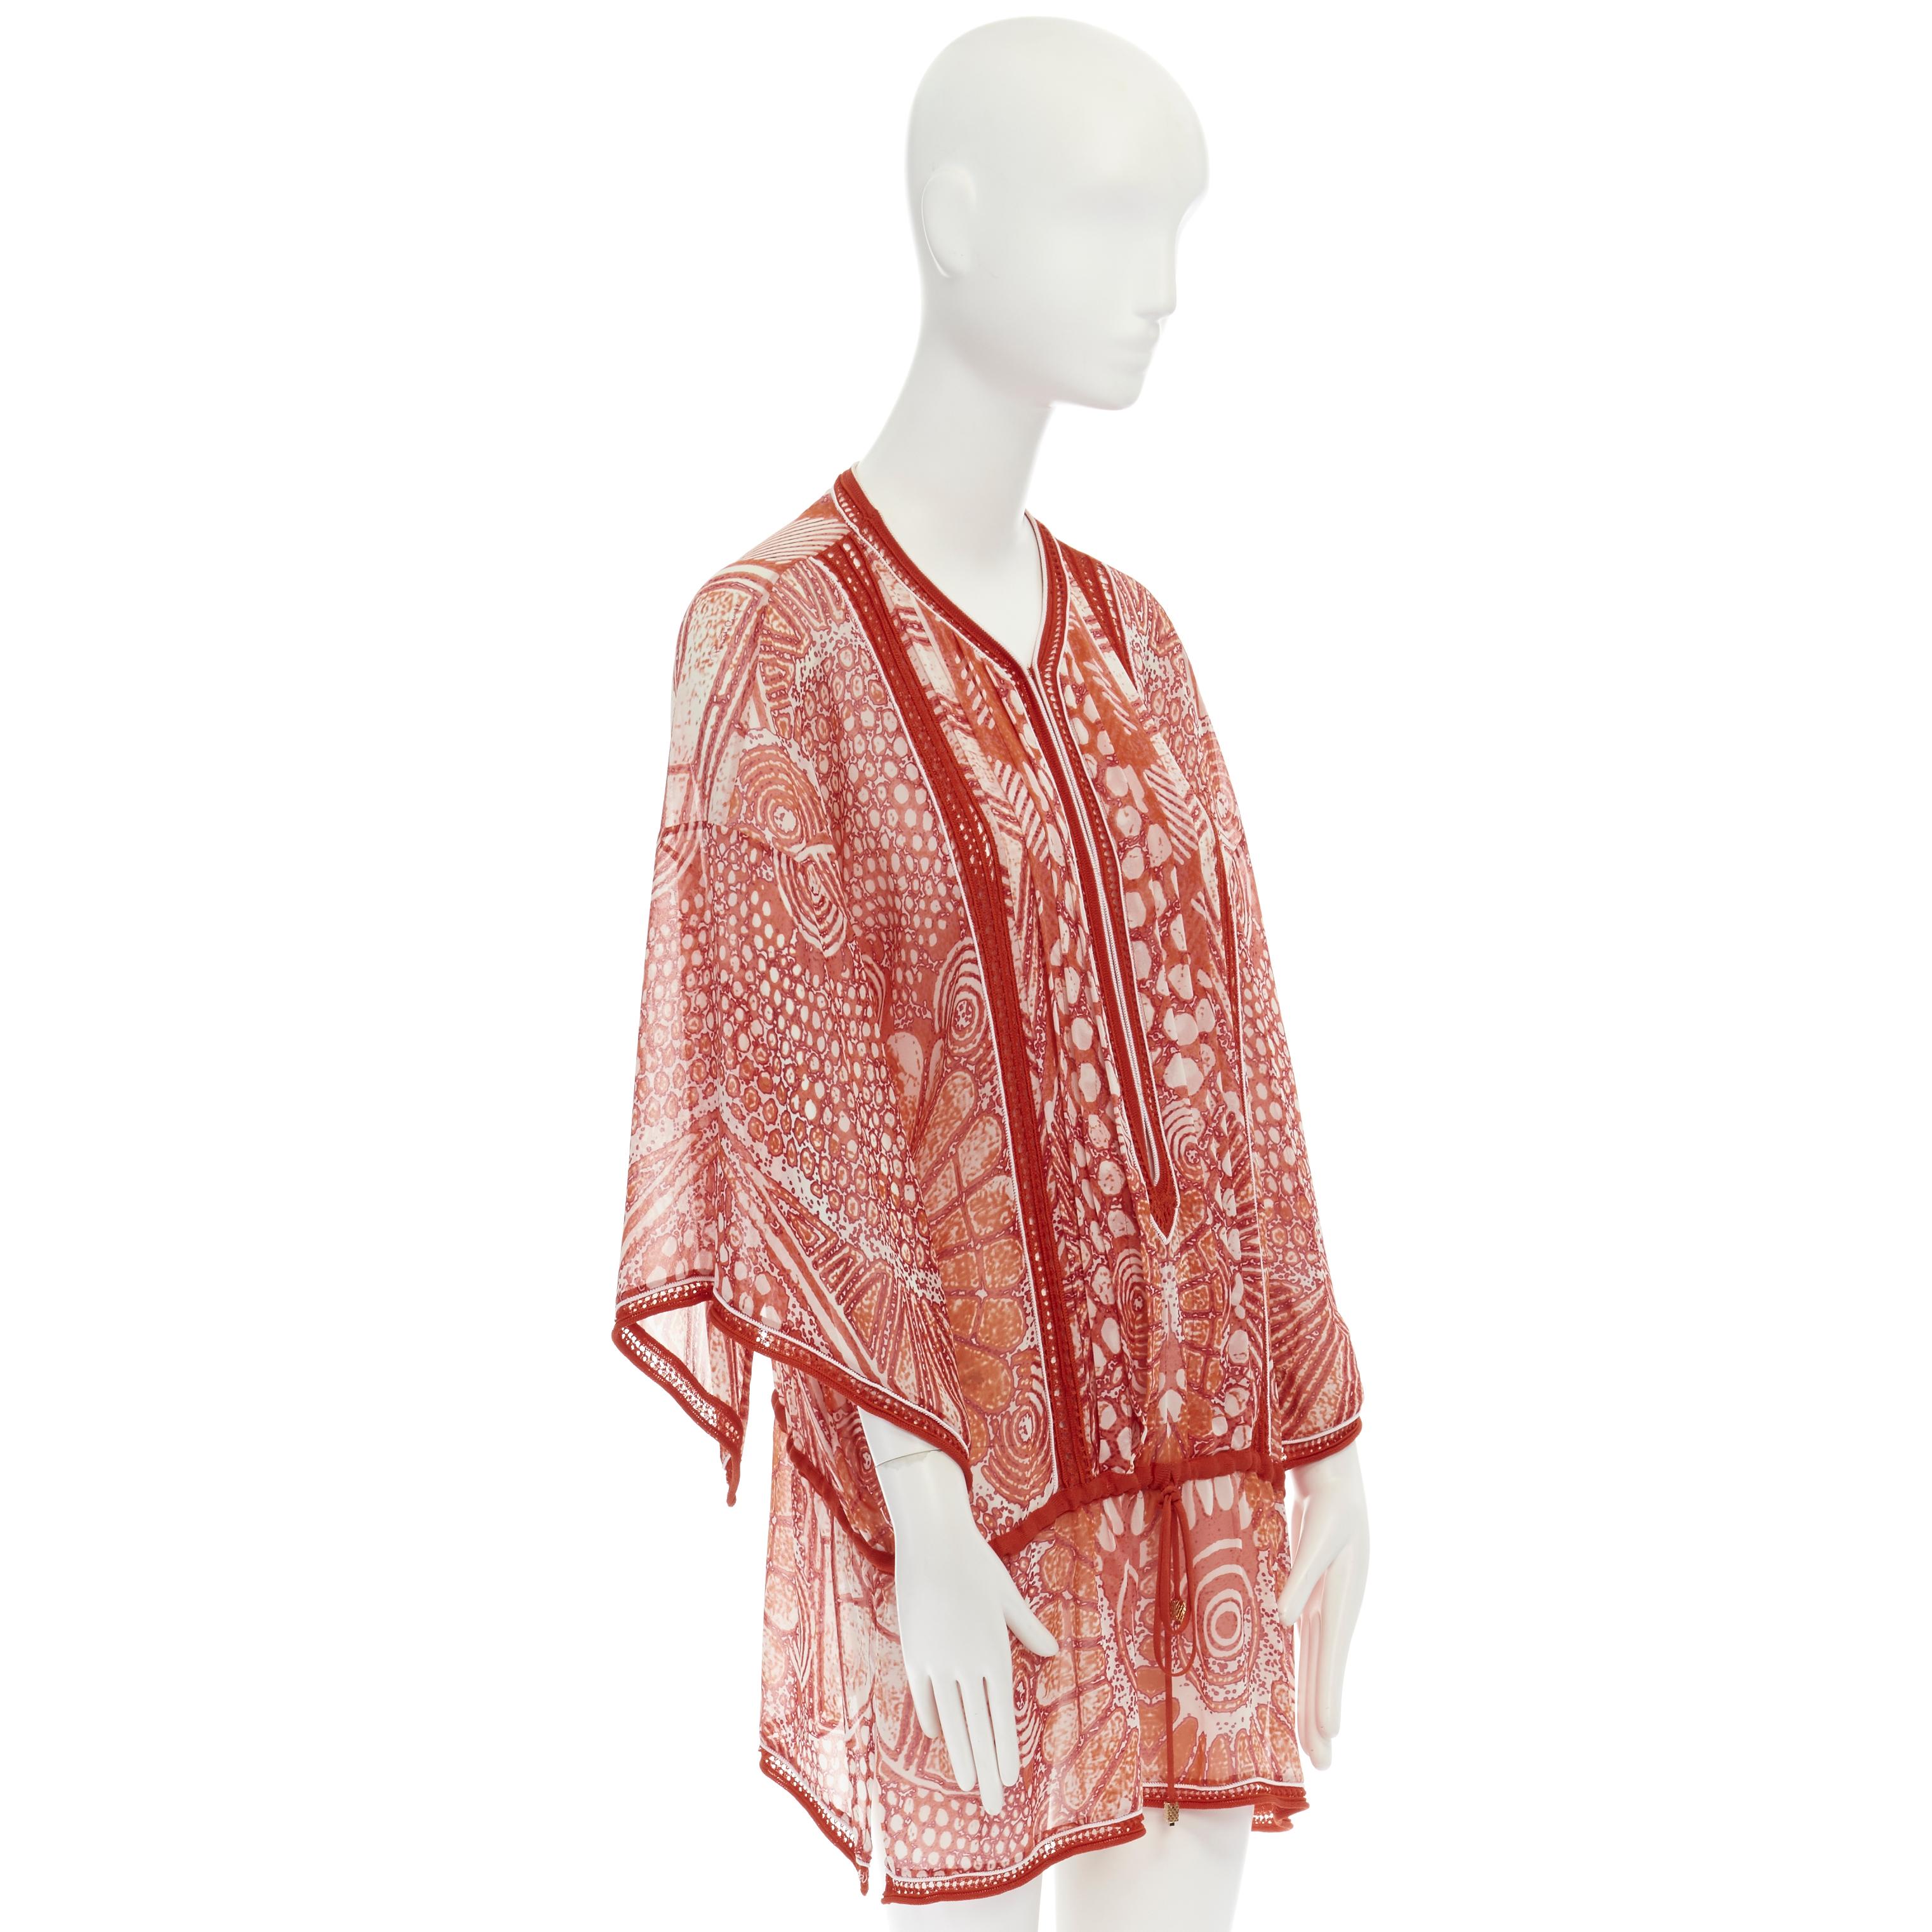 Brown ROBERTO CAVALLI 100% silk red tropical floral crochet seam poncho cover up top S